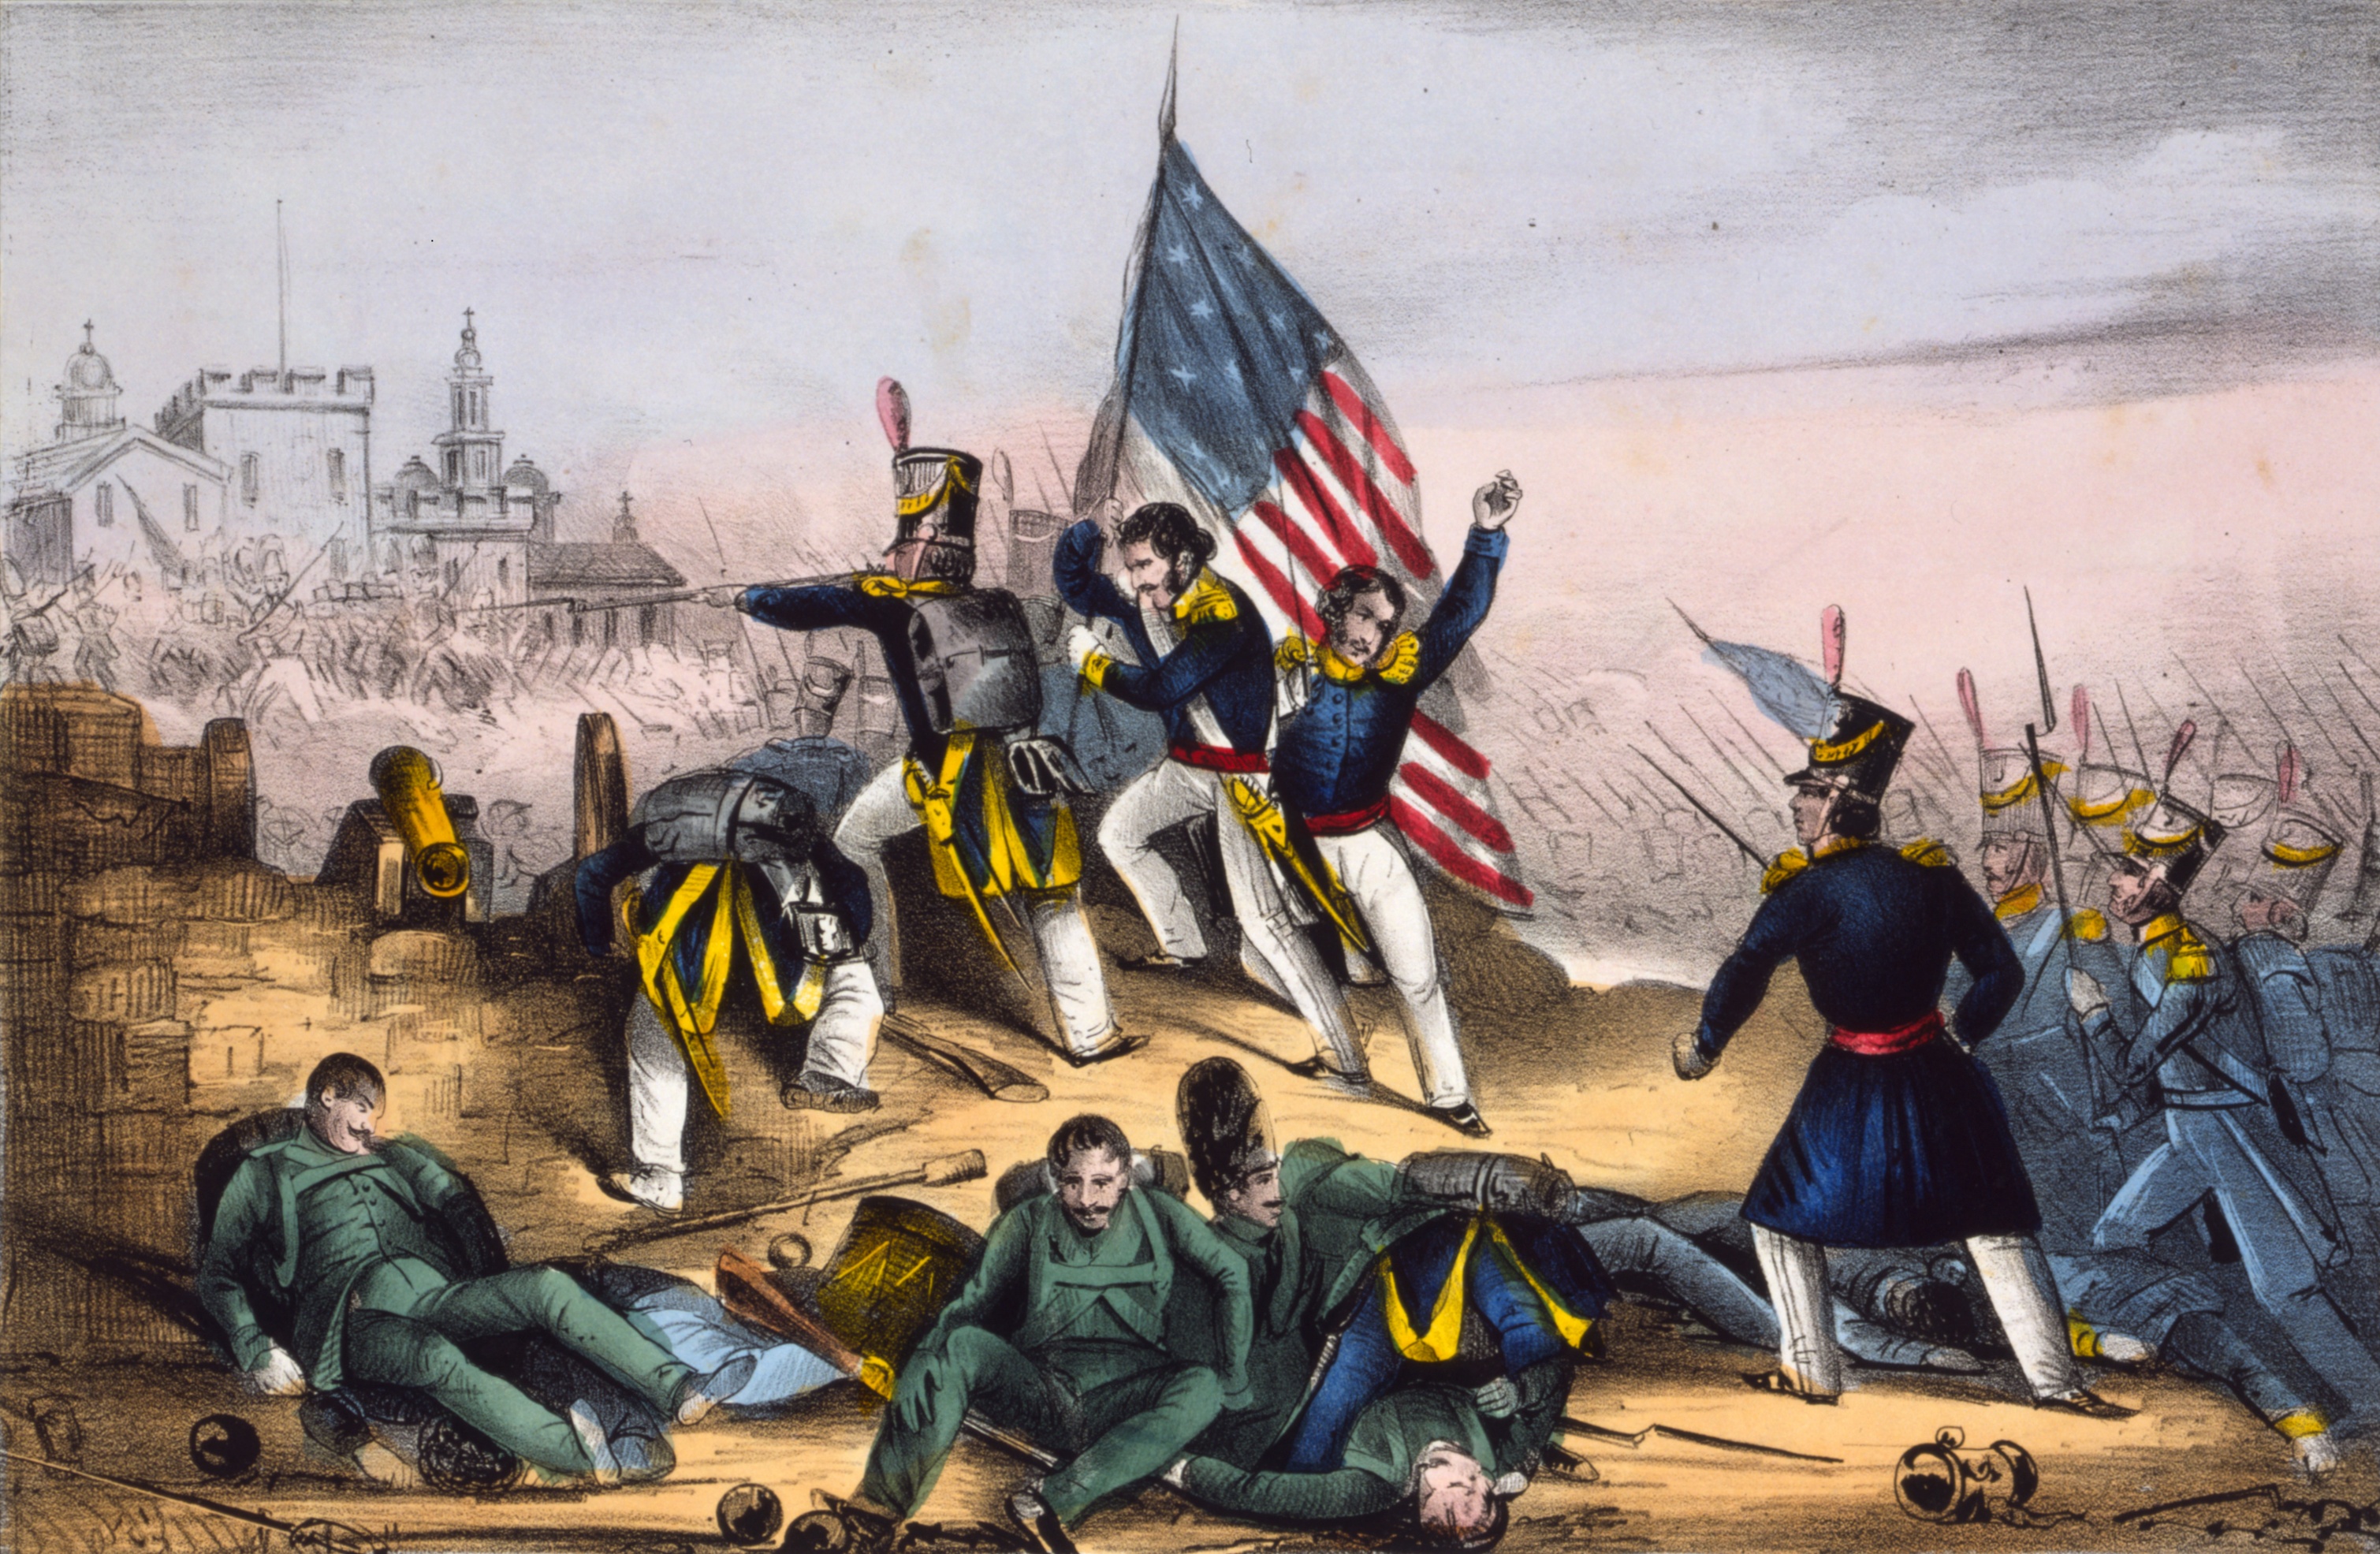 Mexico-United States relations: The Mexican-American War (1846-1848)